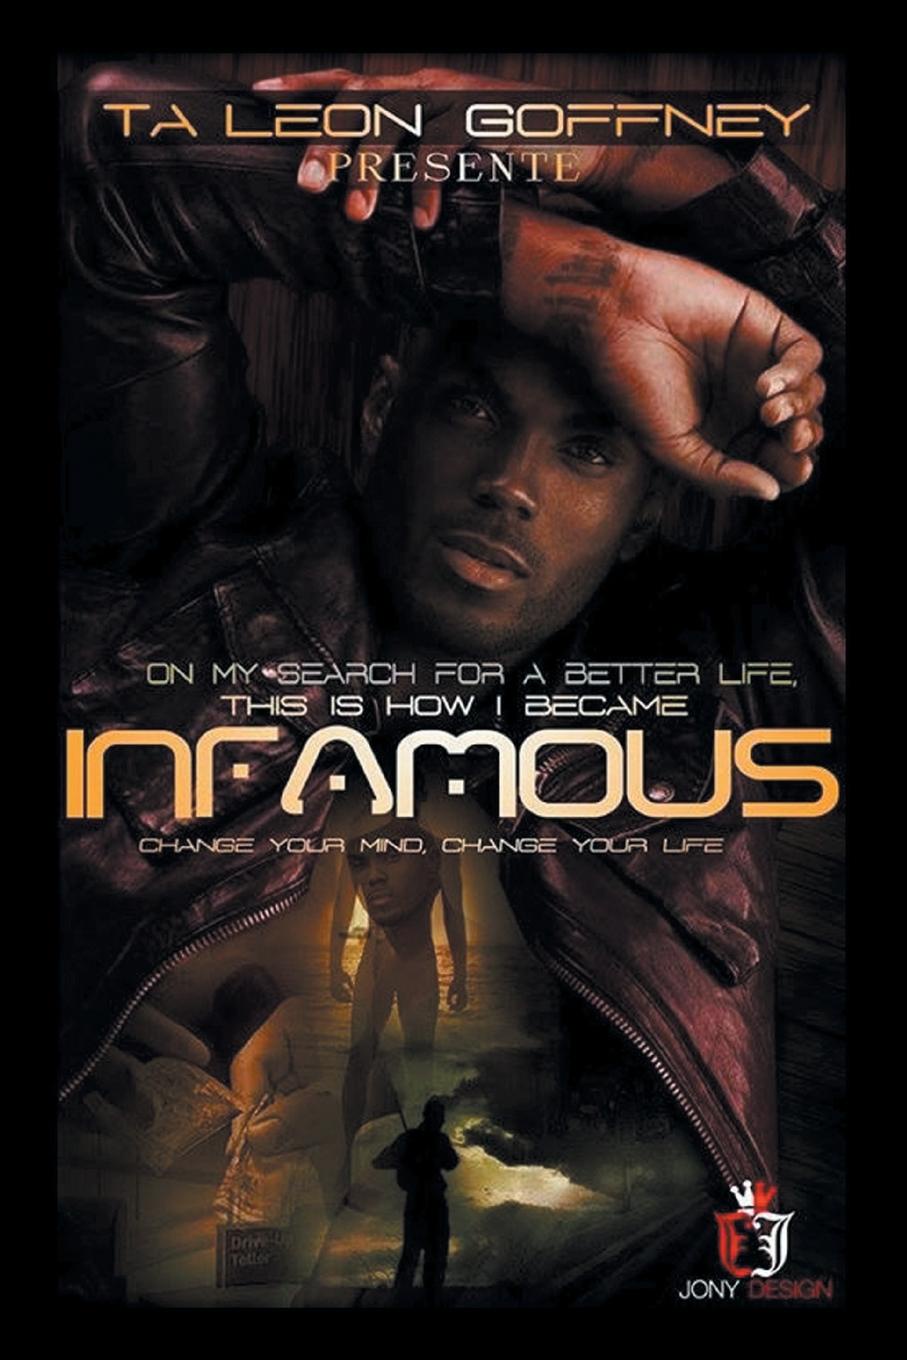 On My Search for a Better Life, This Is How I Became . . . Infamous!!!. An Autobiography